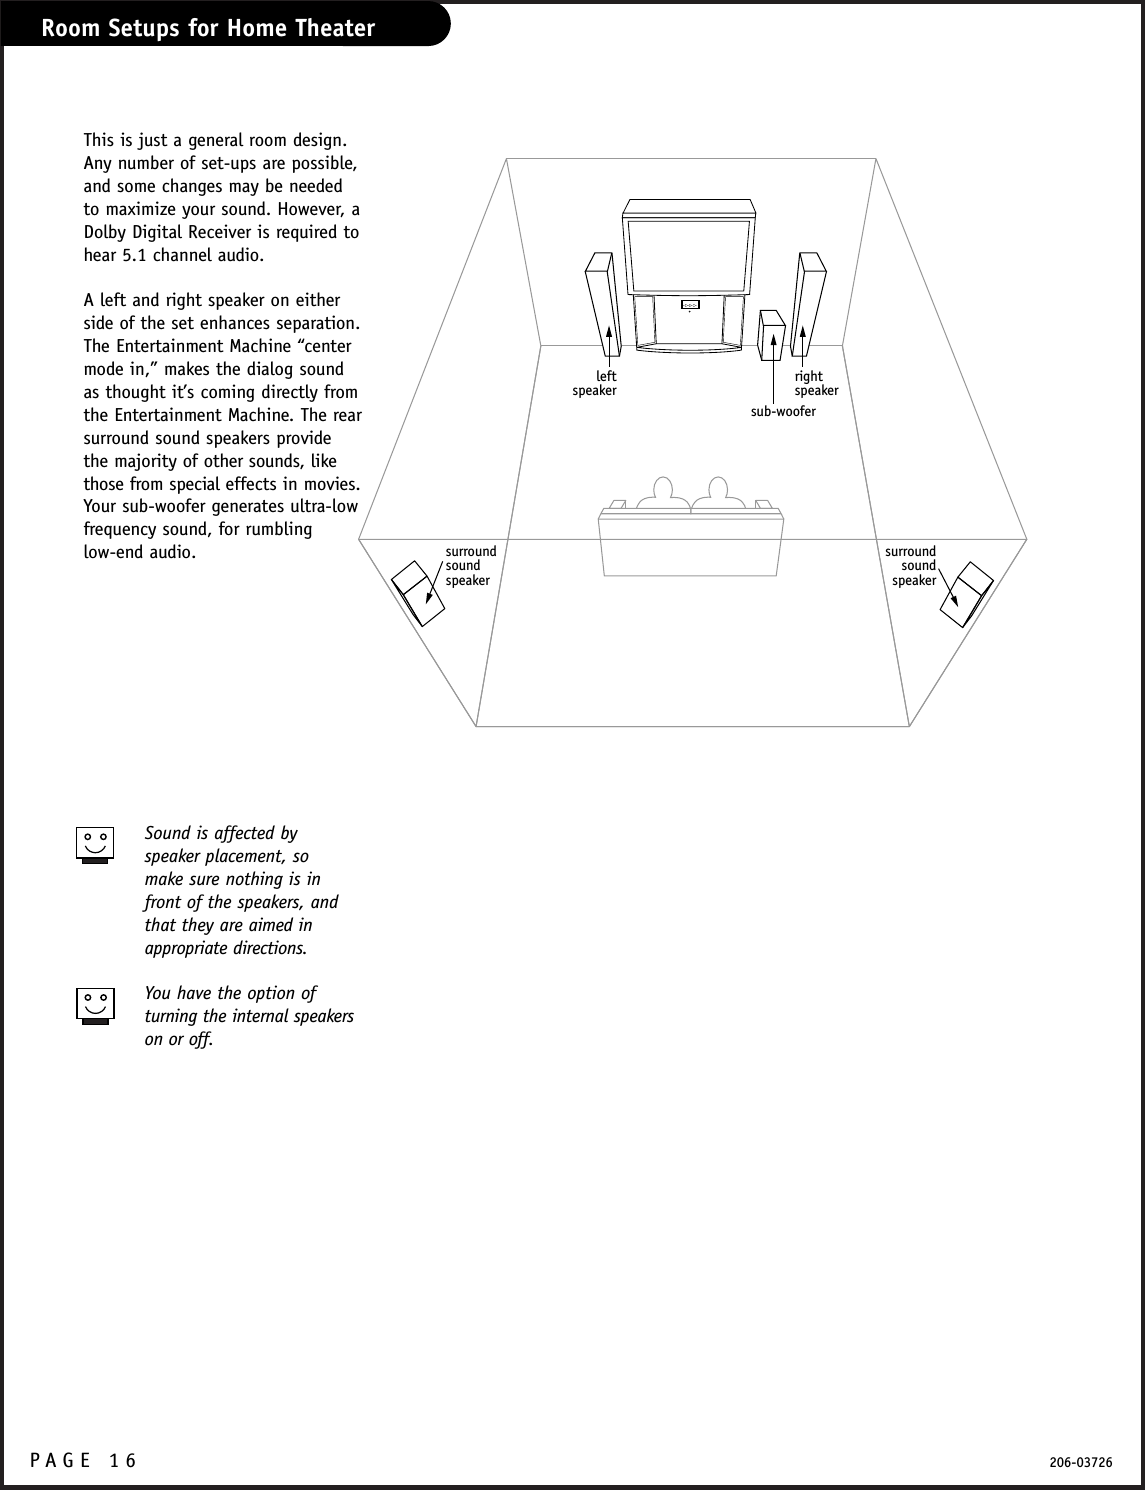 P A GE 16 206-03726Room Setups for Home Theatersub-wooferrightspeakerleftspeakersurroundsound speakersurroundsound speakerThis is just a general room design. Any number of set-ups are possible,and some changes may be neededto maximize your sound. However, aDolby Digital Receiver is required tohear 5.1 channel audio.A left and right speaker on either side of the set enhances separation.The Entertainment Machine “centermode in,” makes the dialog soundas thought it’s coming directly fromthe Entertainment Machine. The rearsurround sound speakers provide the majority of other sounds, likethose from special effects in movies.Your sub-woofer generates ultra-low frequency sound, for rumbling low-end audio.Sound is affected by speaker placement, so make sure nothing is infront of the speakers, andthat they are aimed inappropriate directions.You have the option of turning the internal speakerson or off.